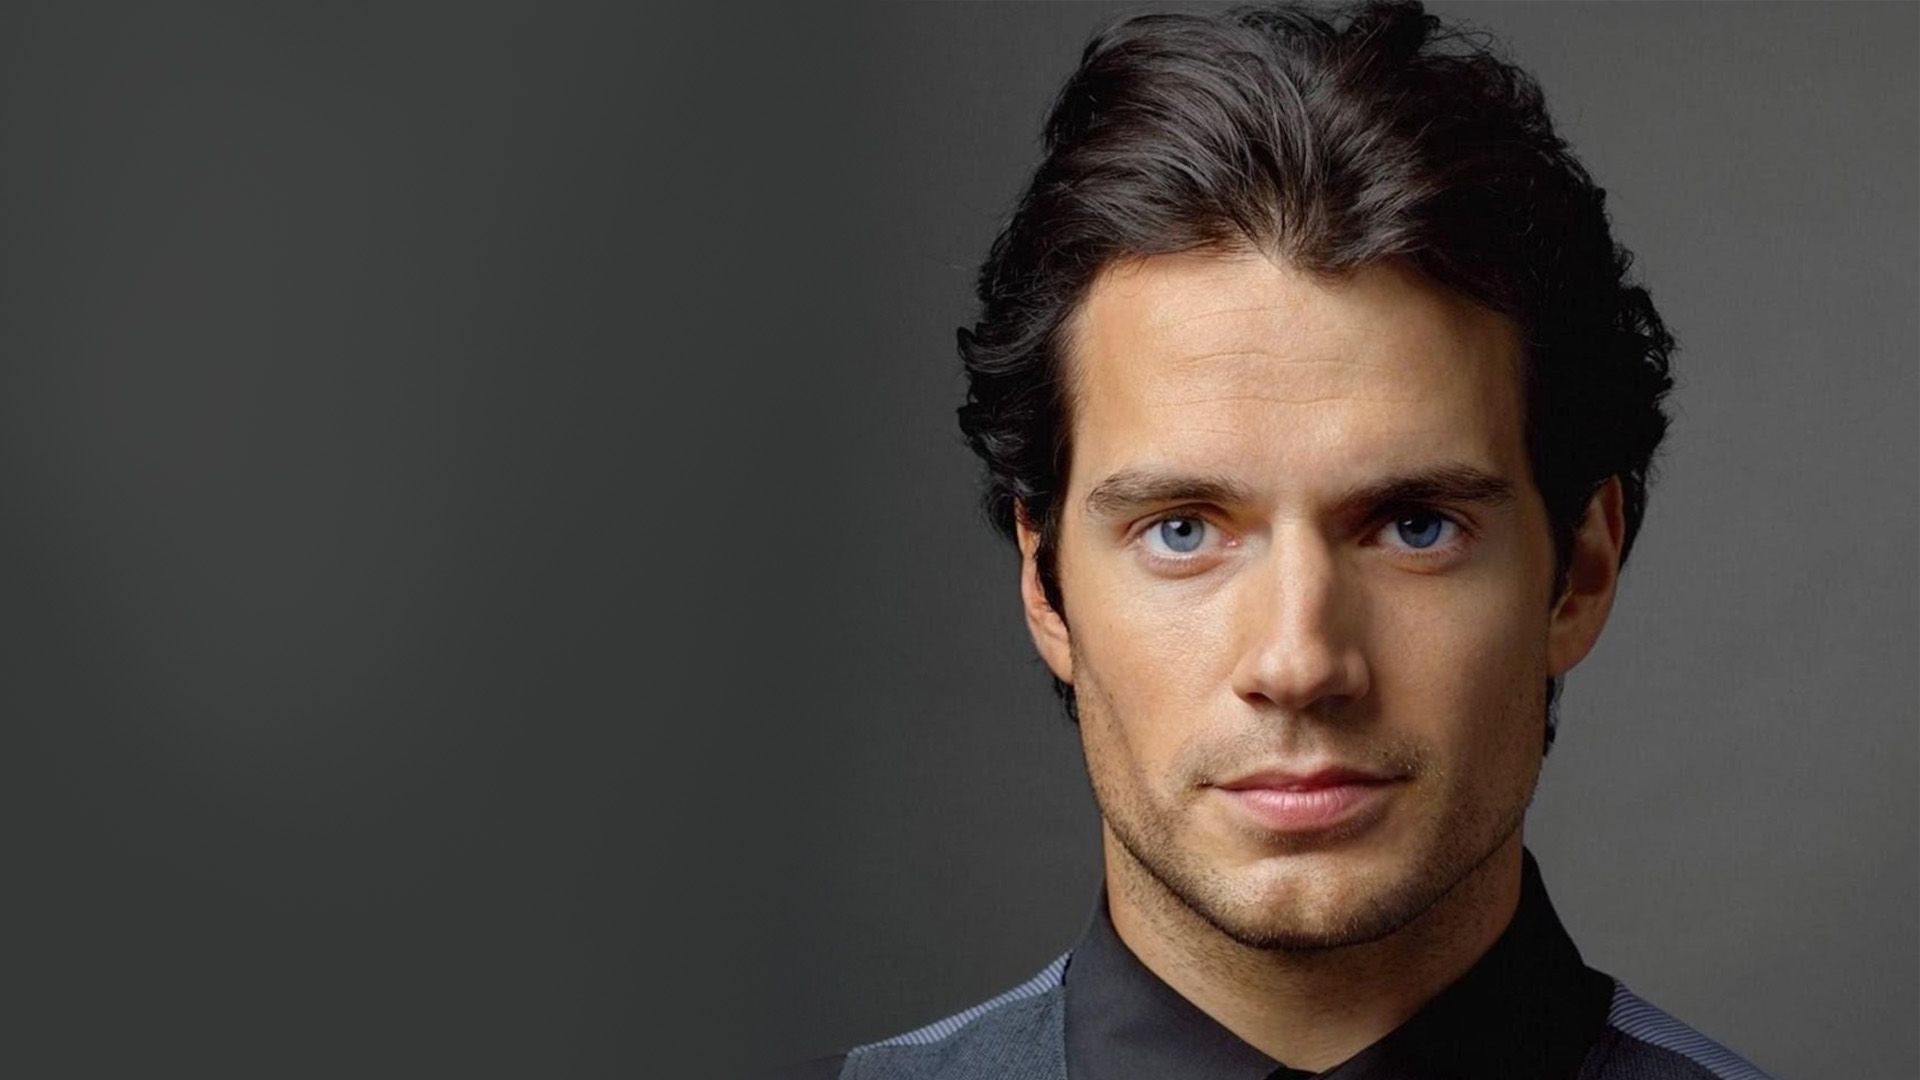 HD Henry Cavill Wallpapers HdCoolWallpapers.Com